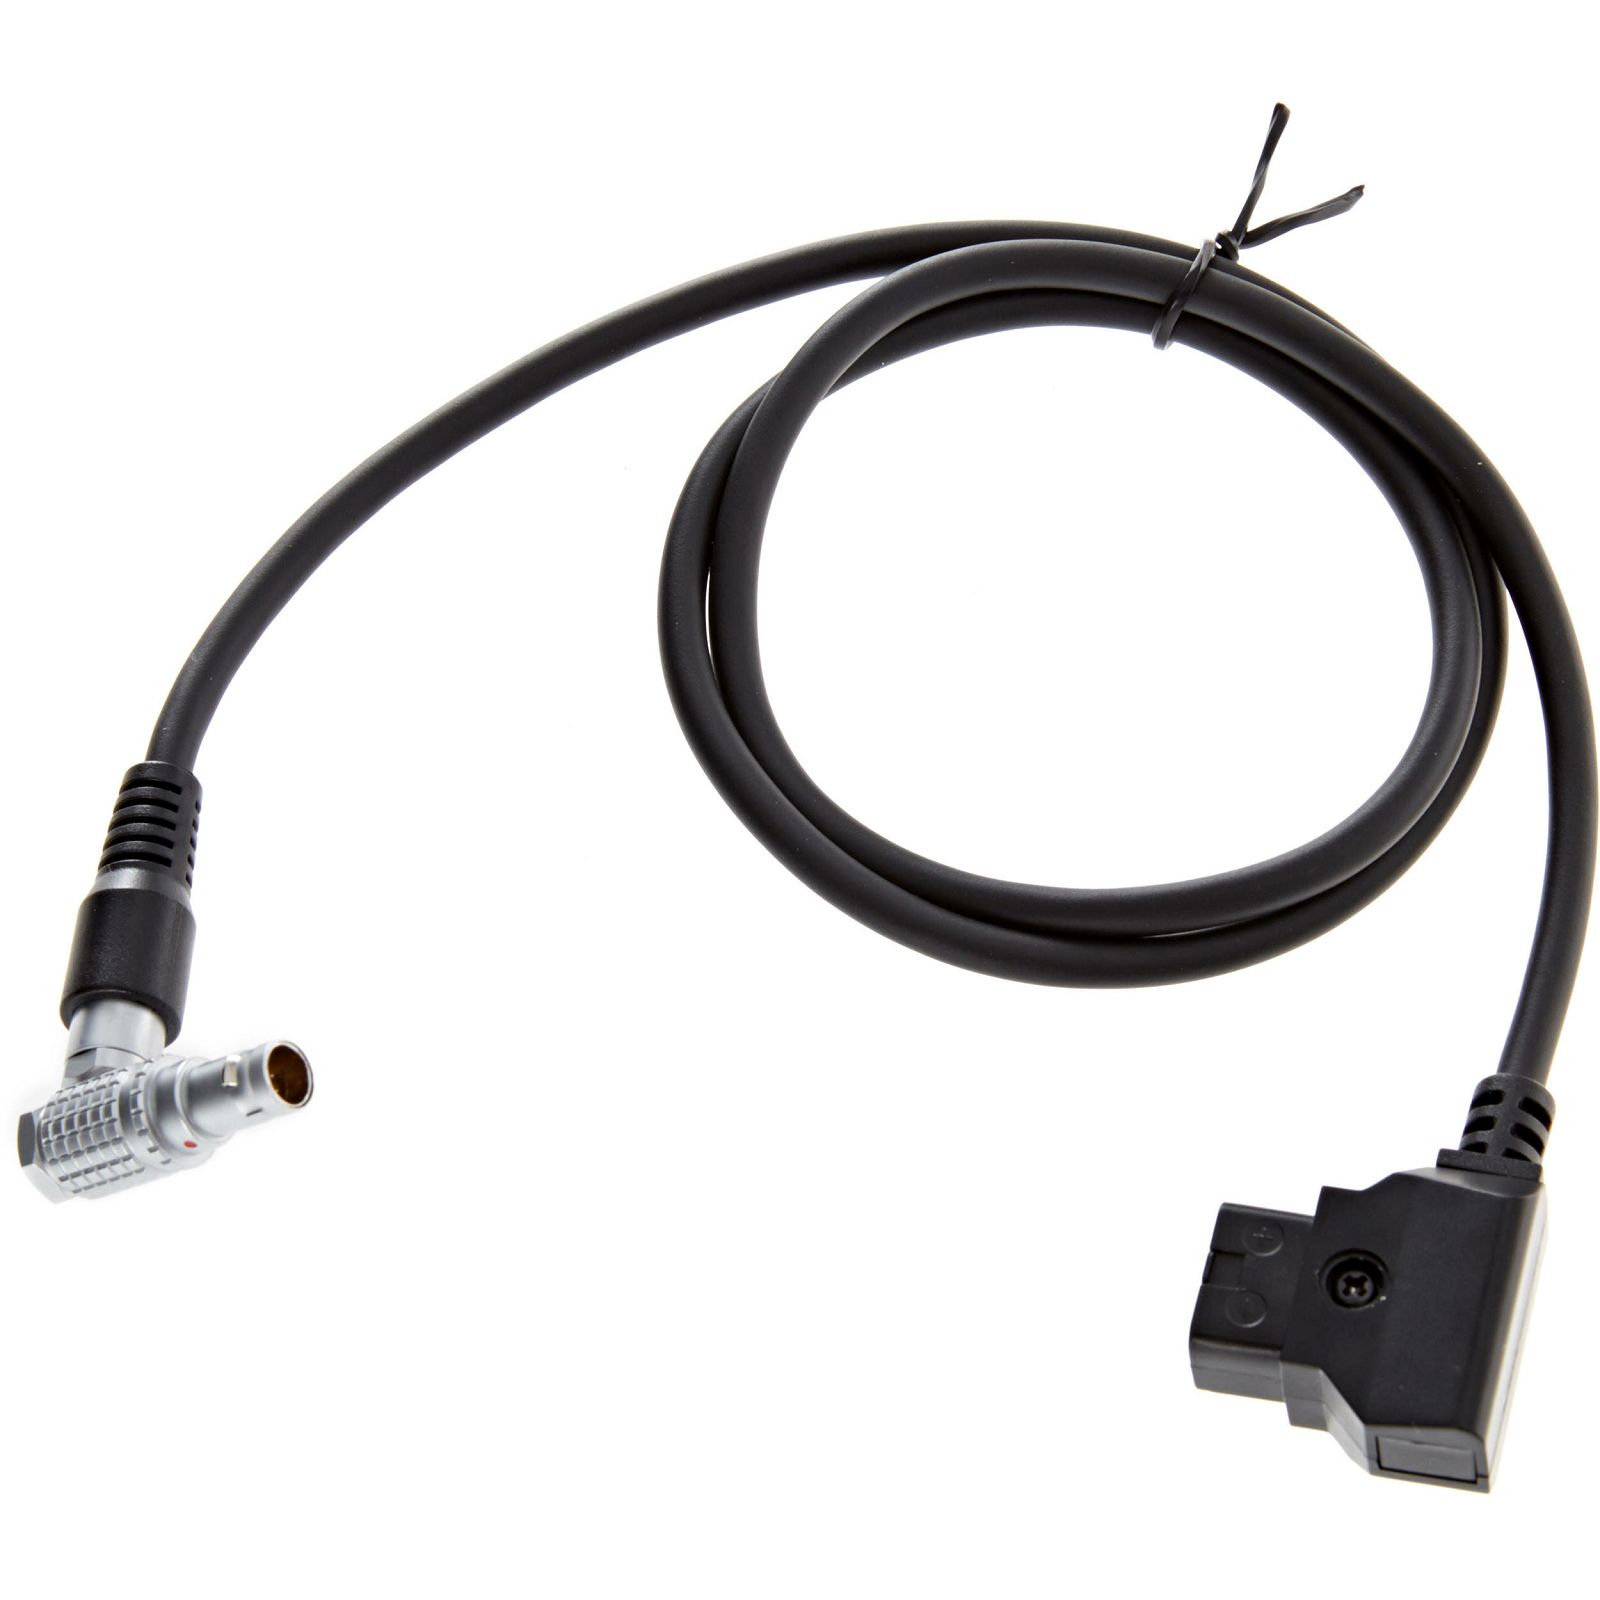 DJI Focus Spare Part 17 Motor Power Cable (Right Angle, 400mm)  